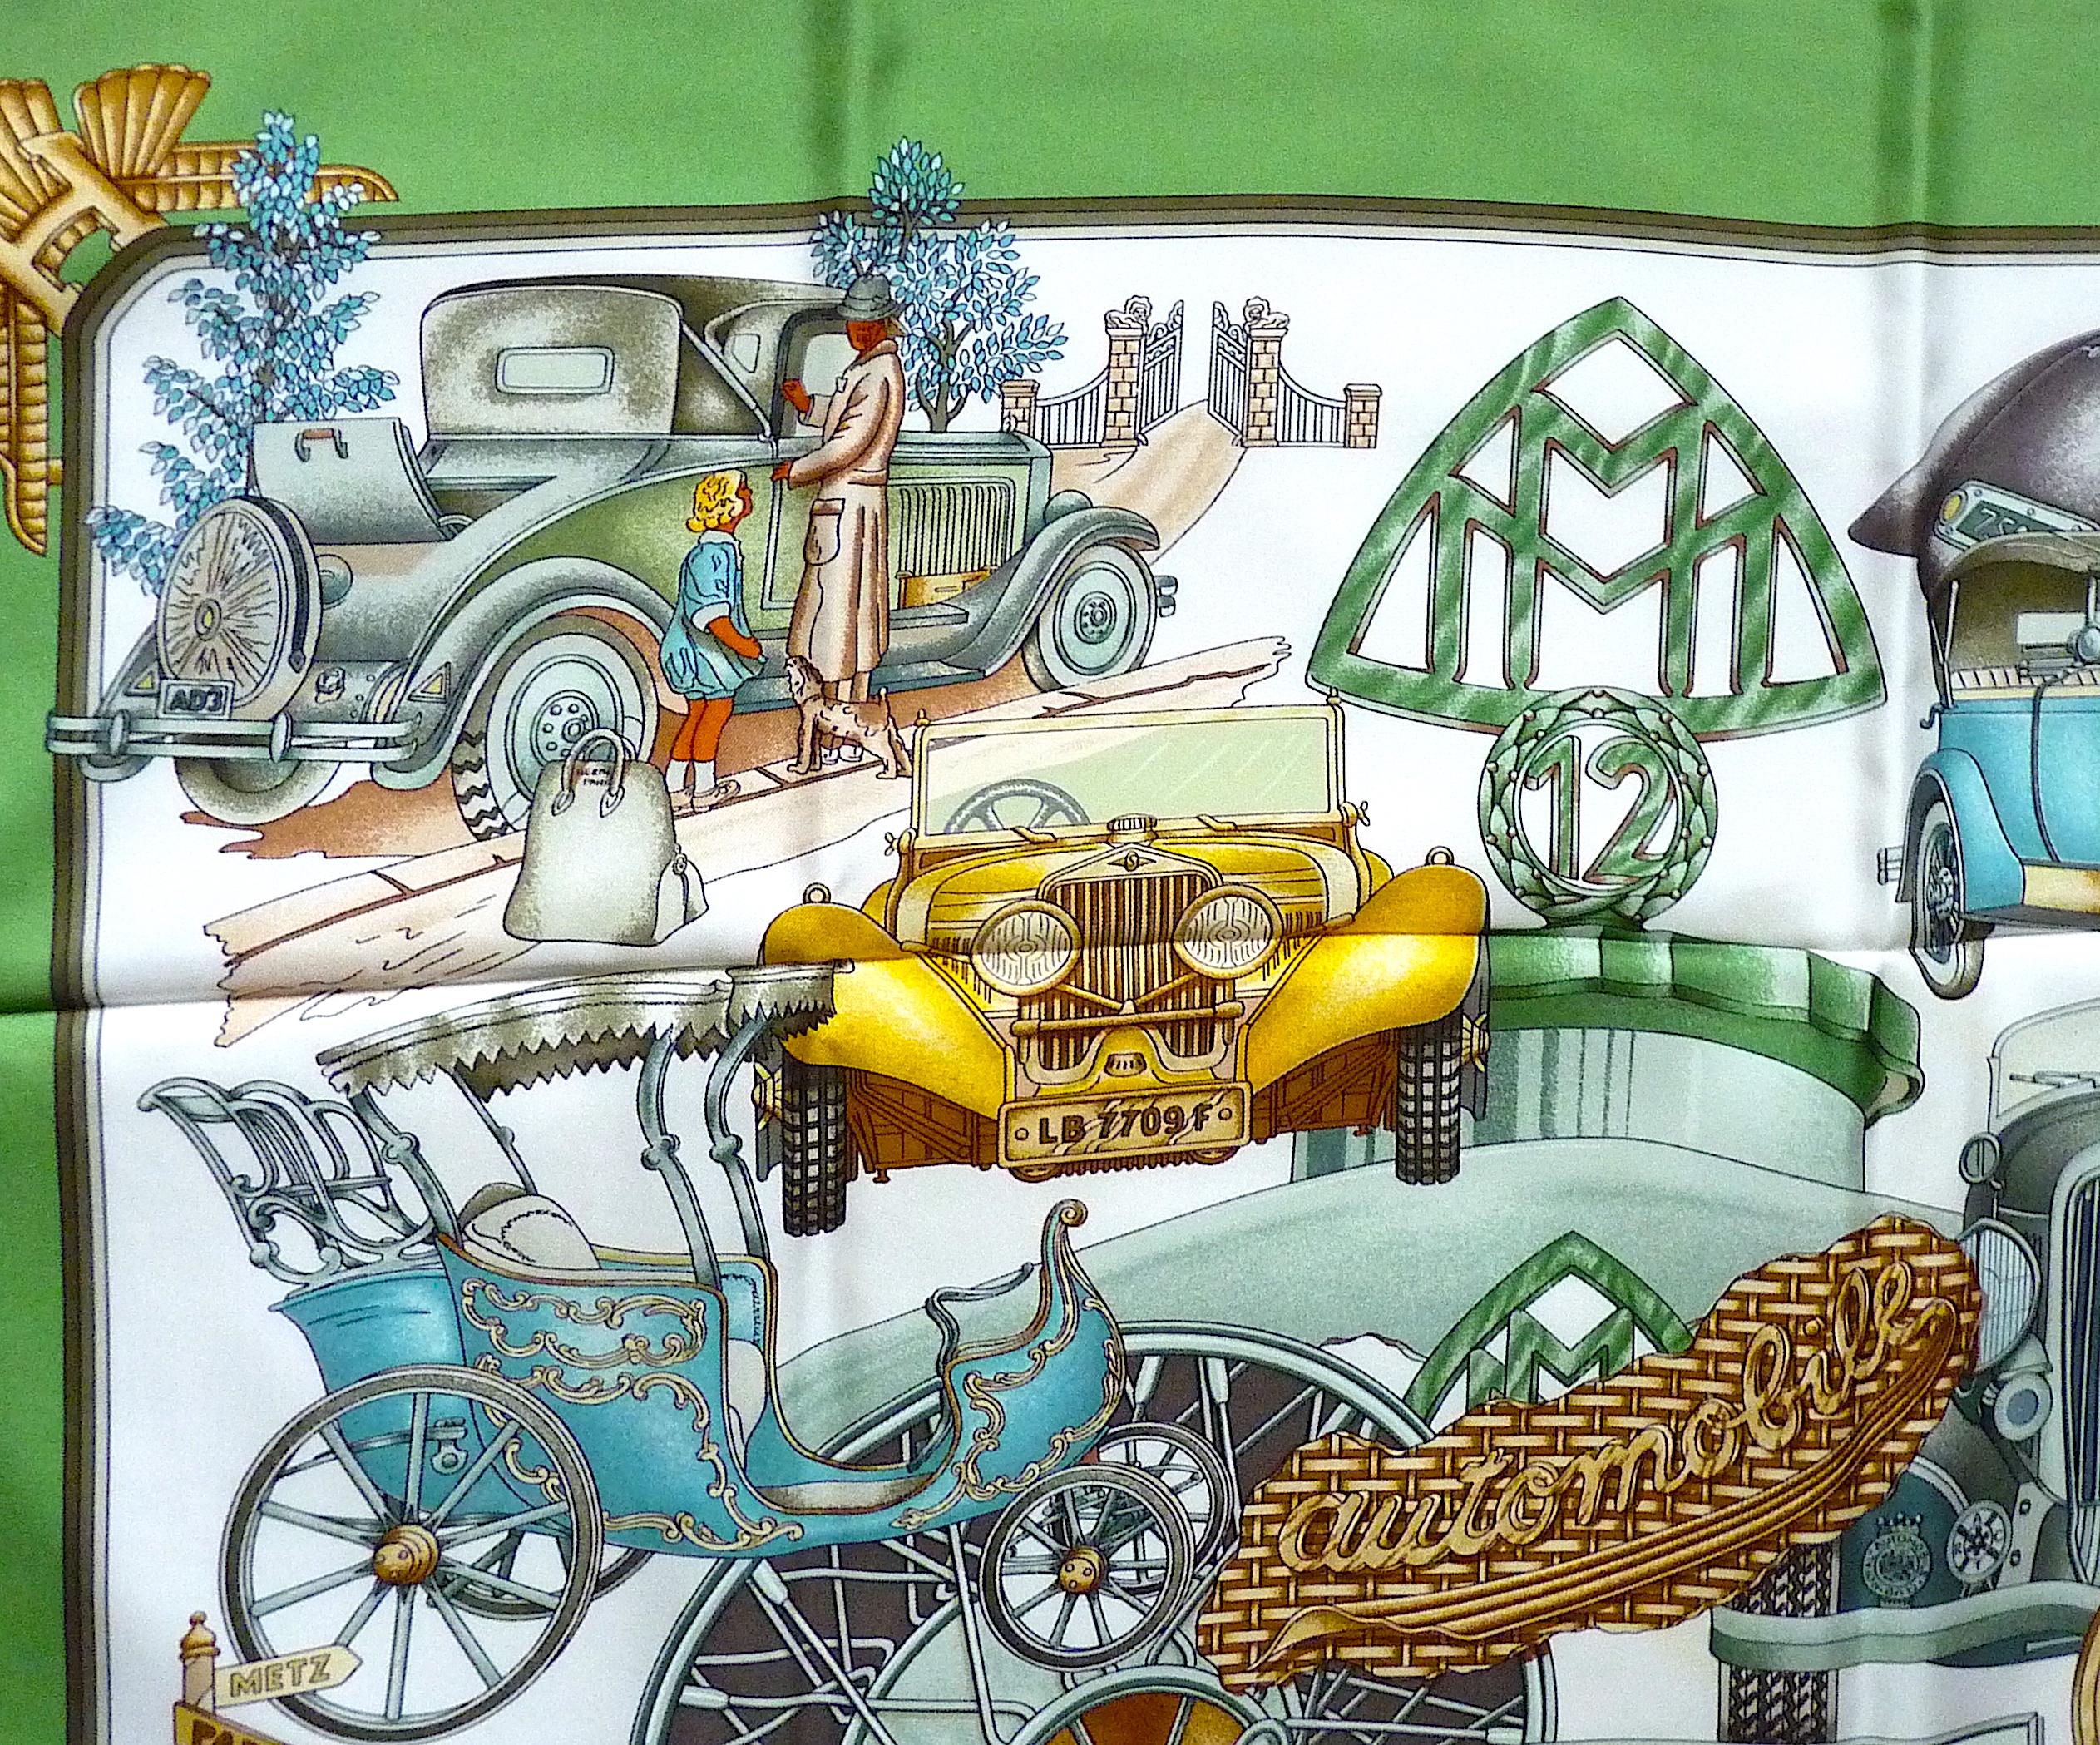 HERMES Scarf Automobile By Joachim Metz in Original Box, Issued in 1995 2